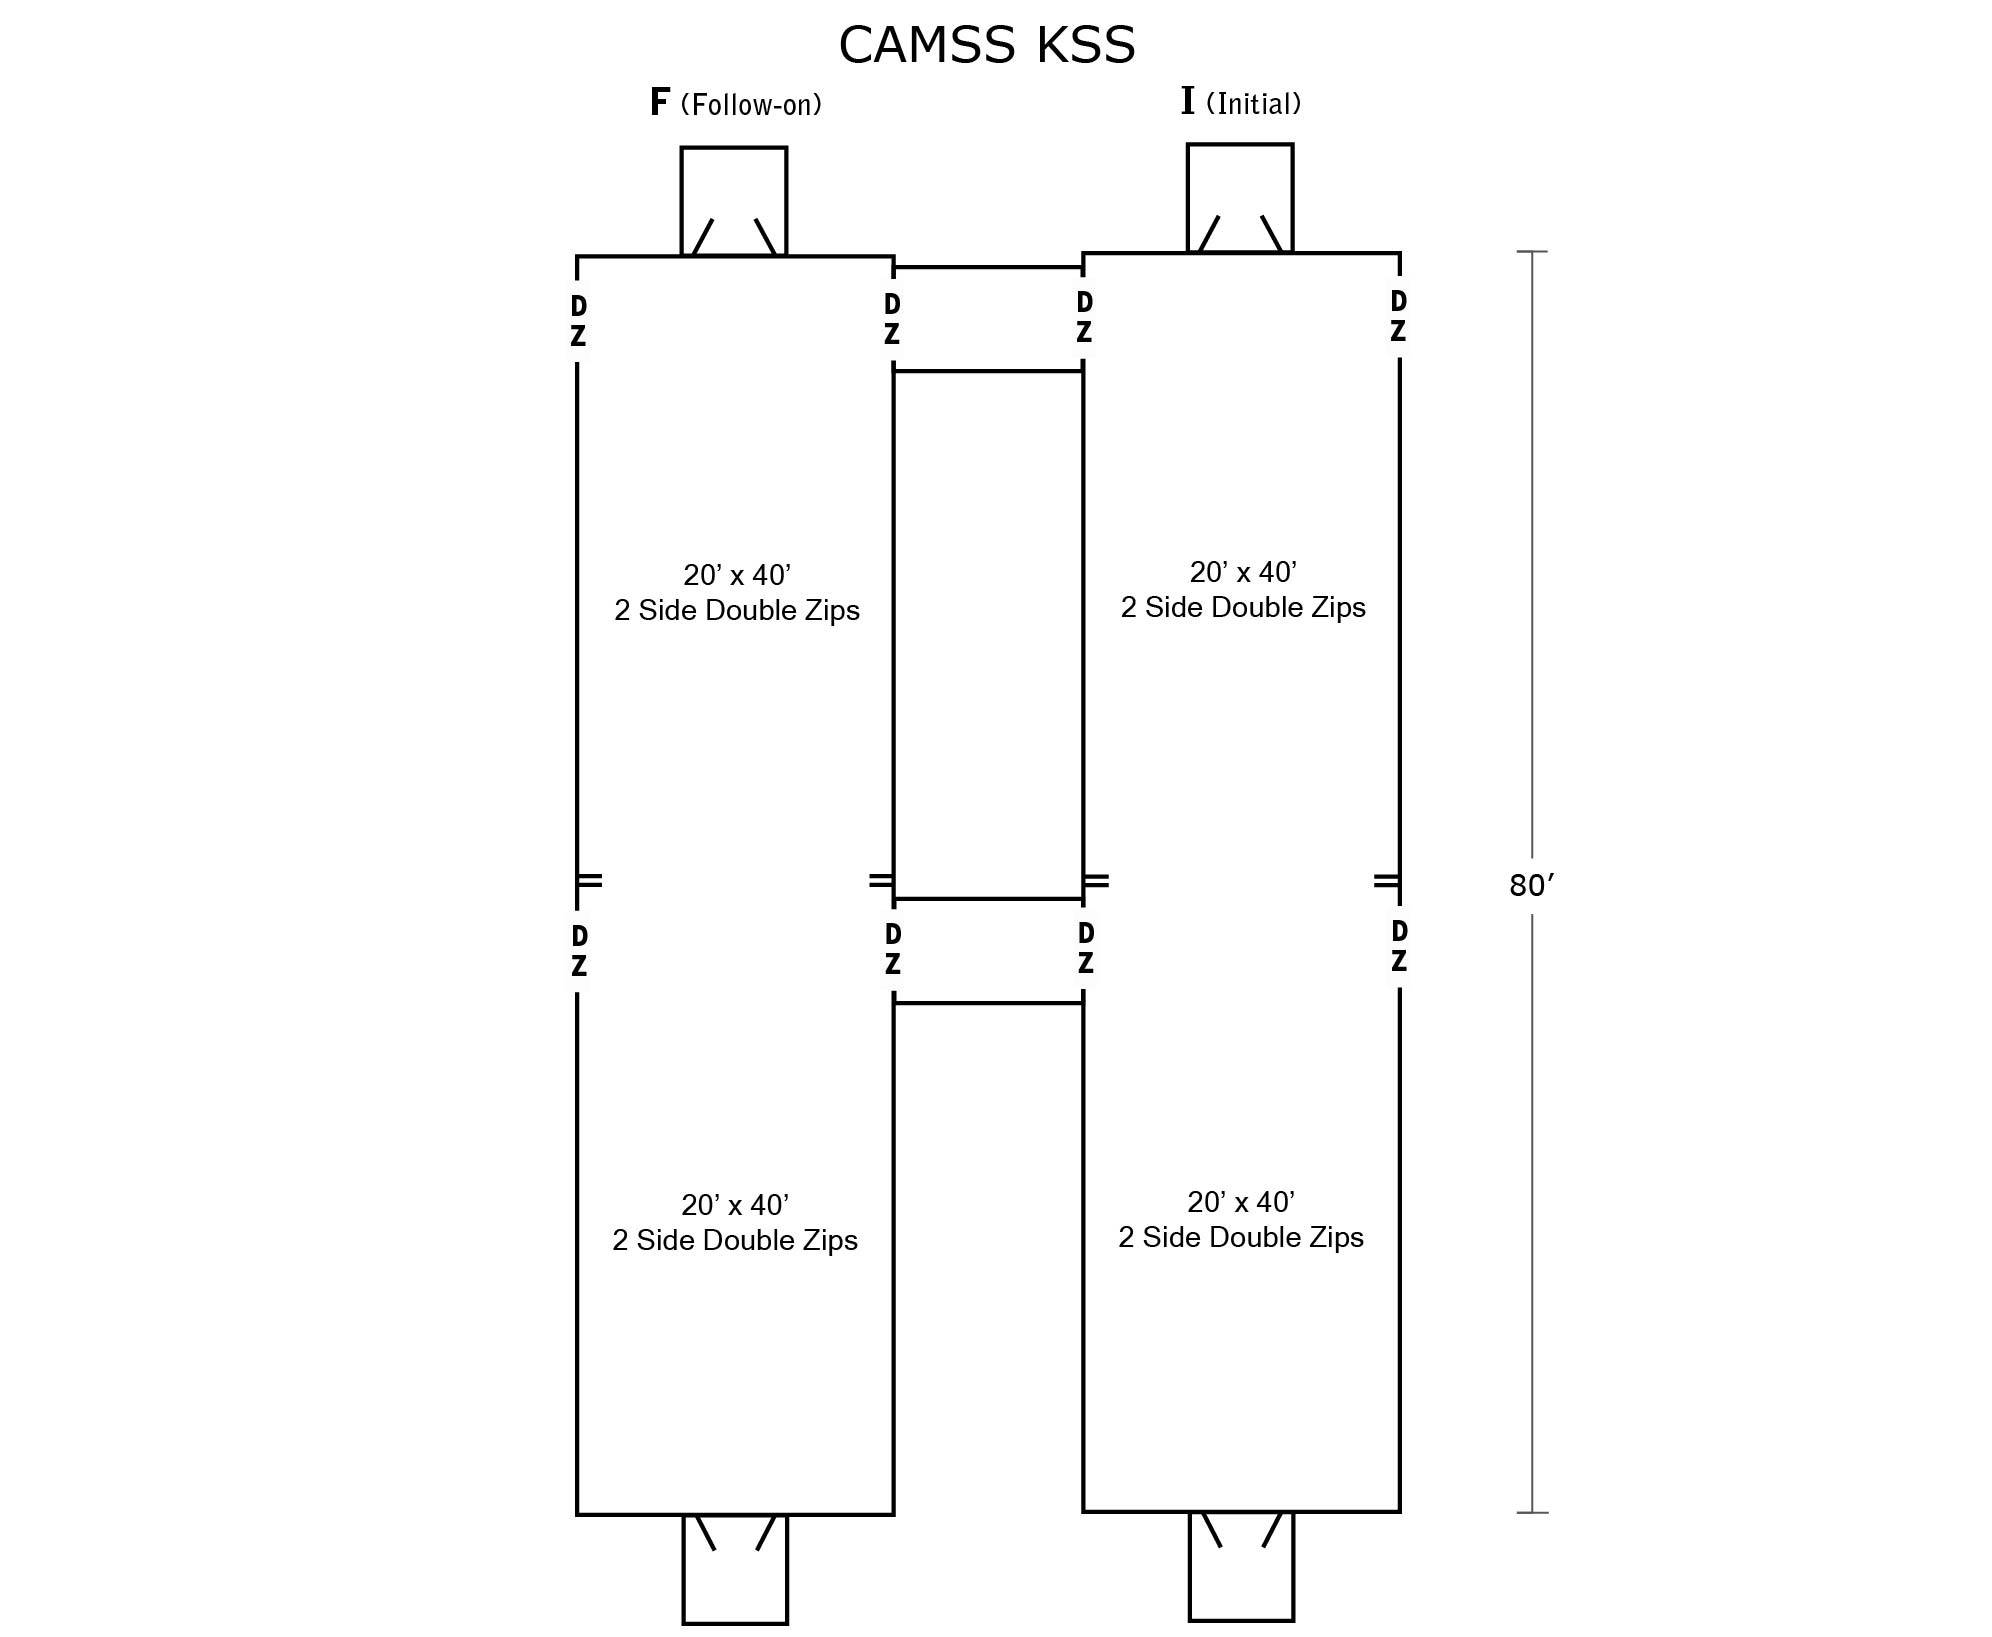 CAMSS KSS Military Shelter - Diagram and Dimensions